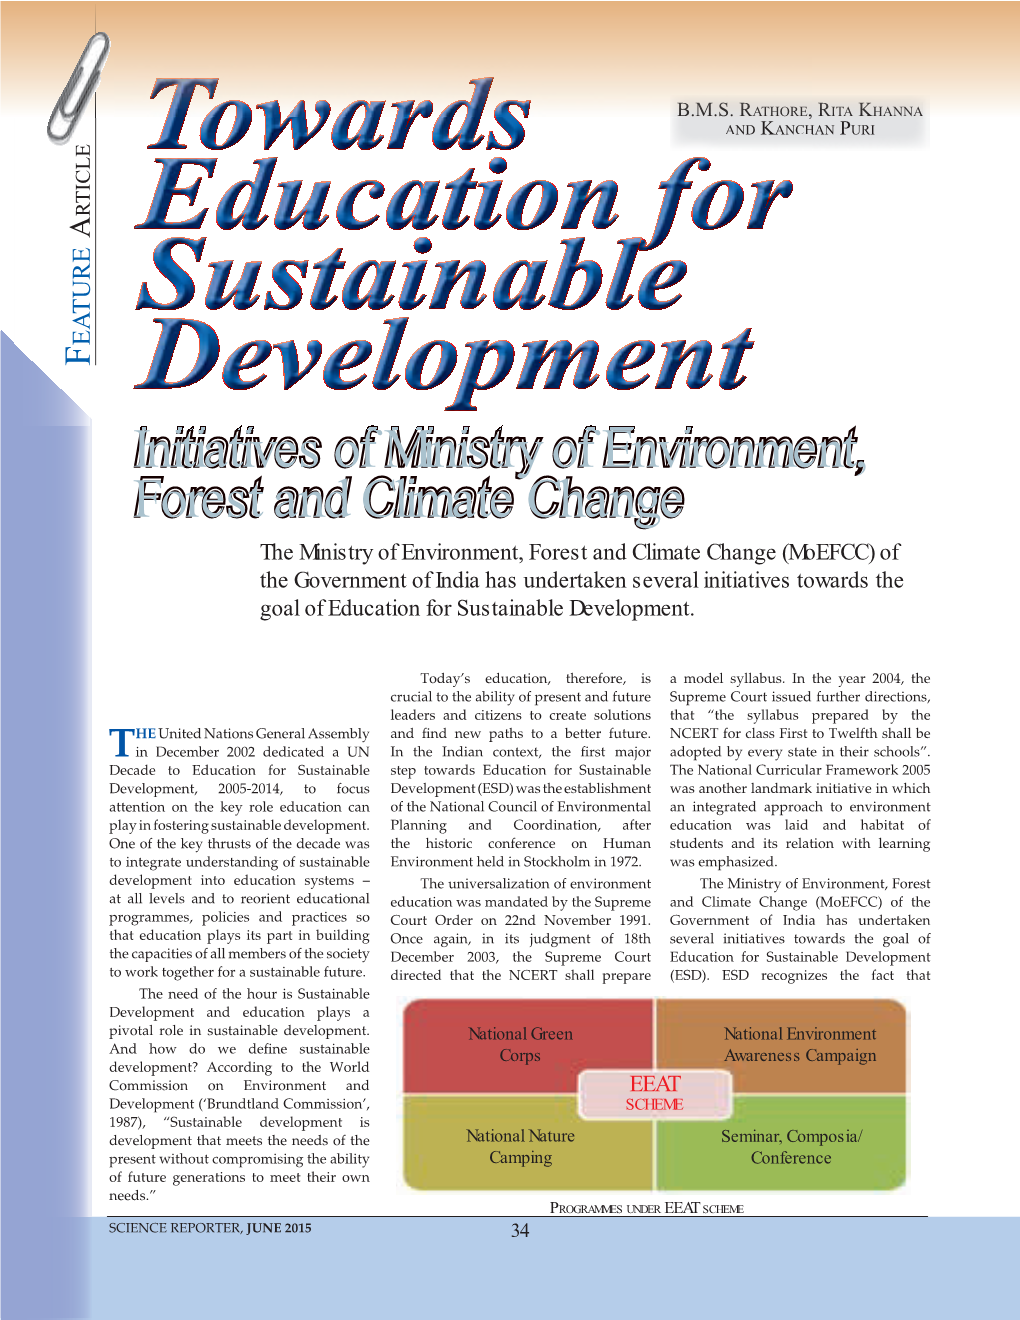 Initiatives of Ministry of Environment, Forest and Climate Change